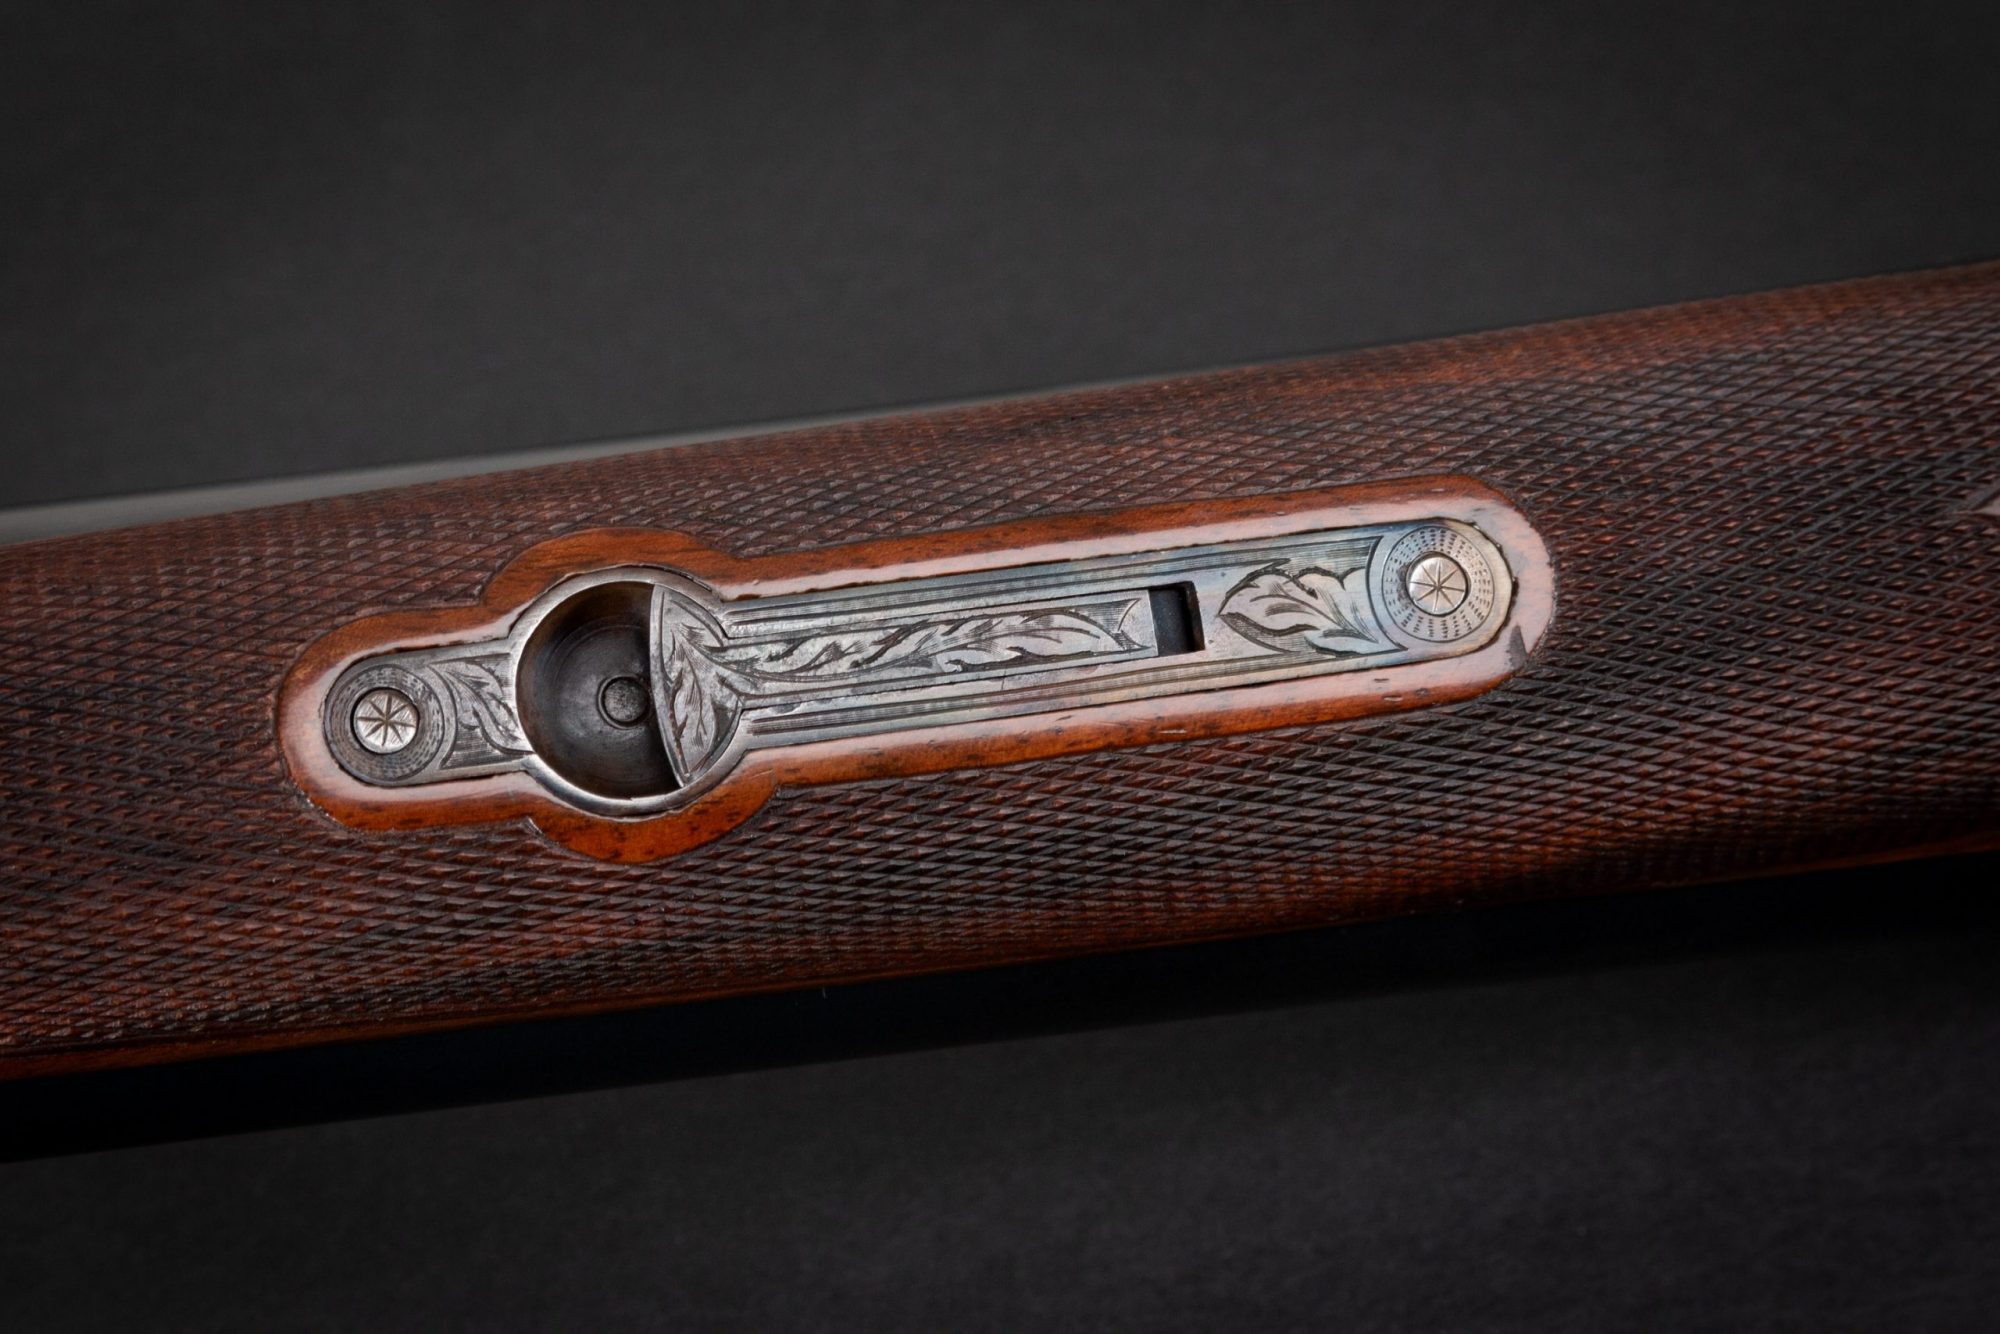 Photo of pre-owned A.H. Fox XE 12 gauge shotgun, featuring metal restoration by Turnbull Restoration